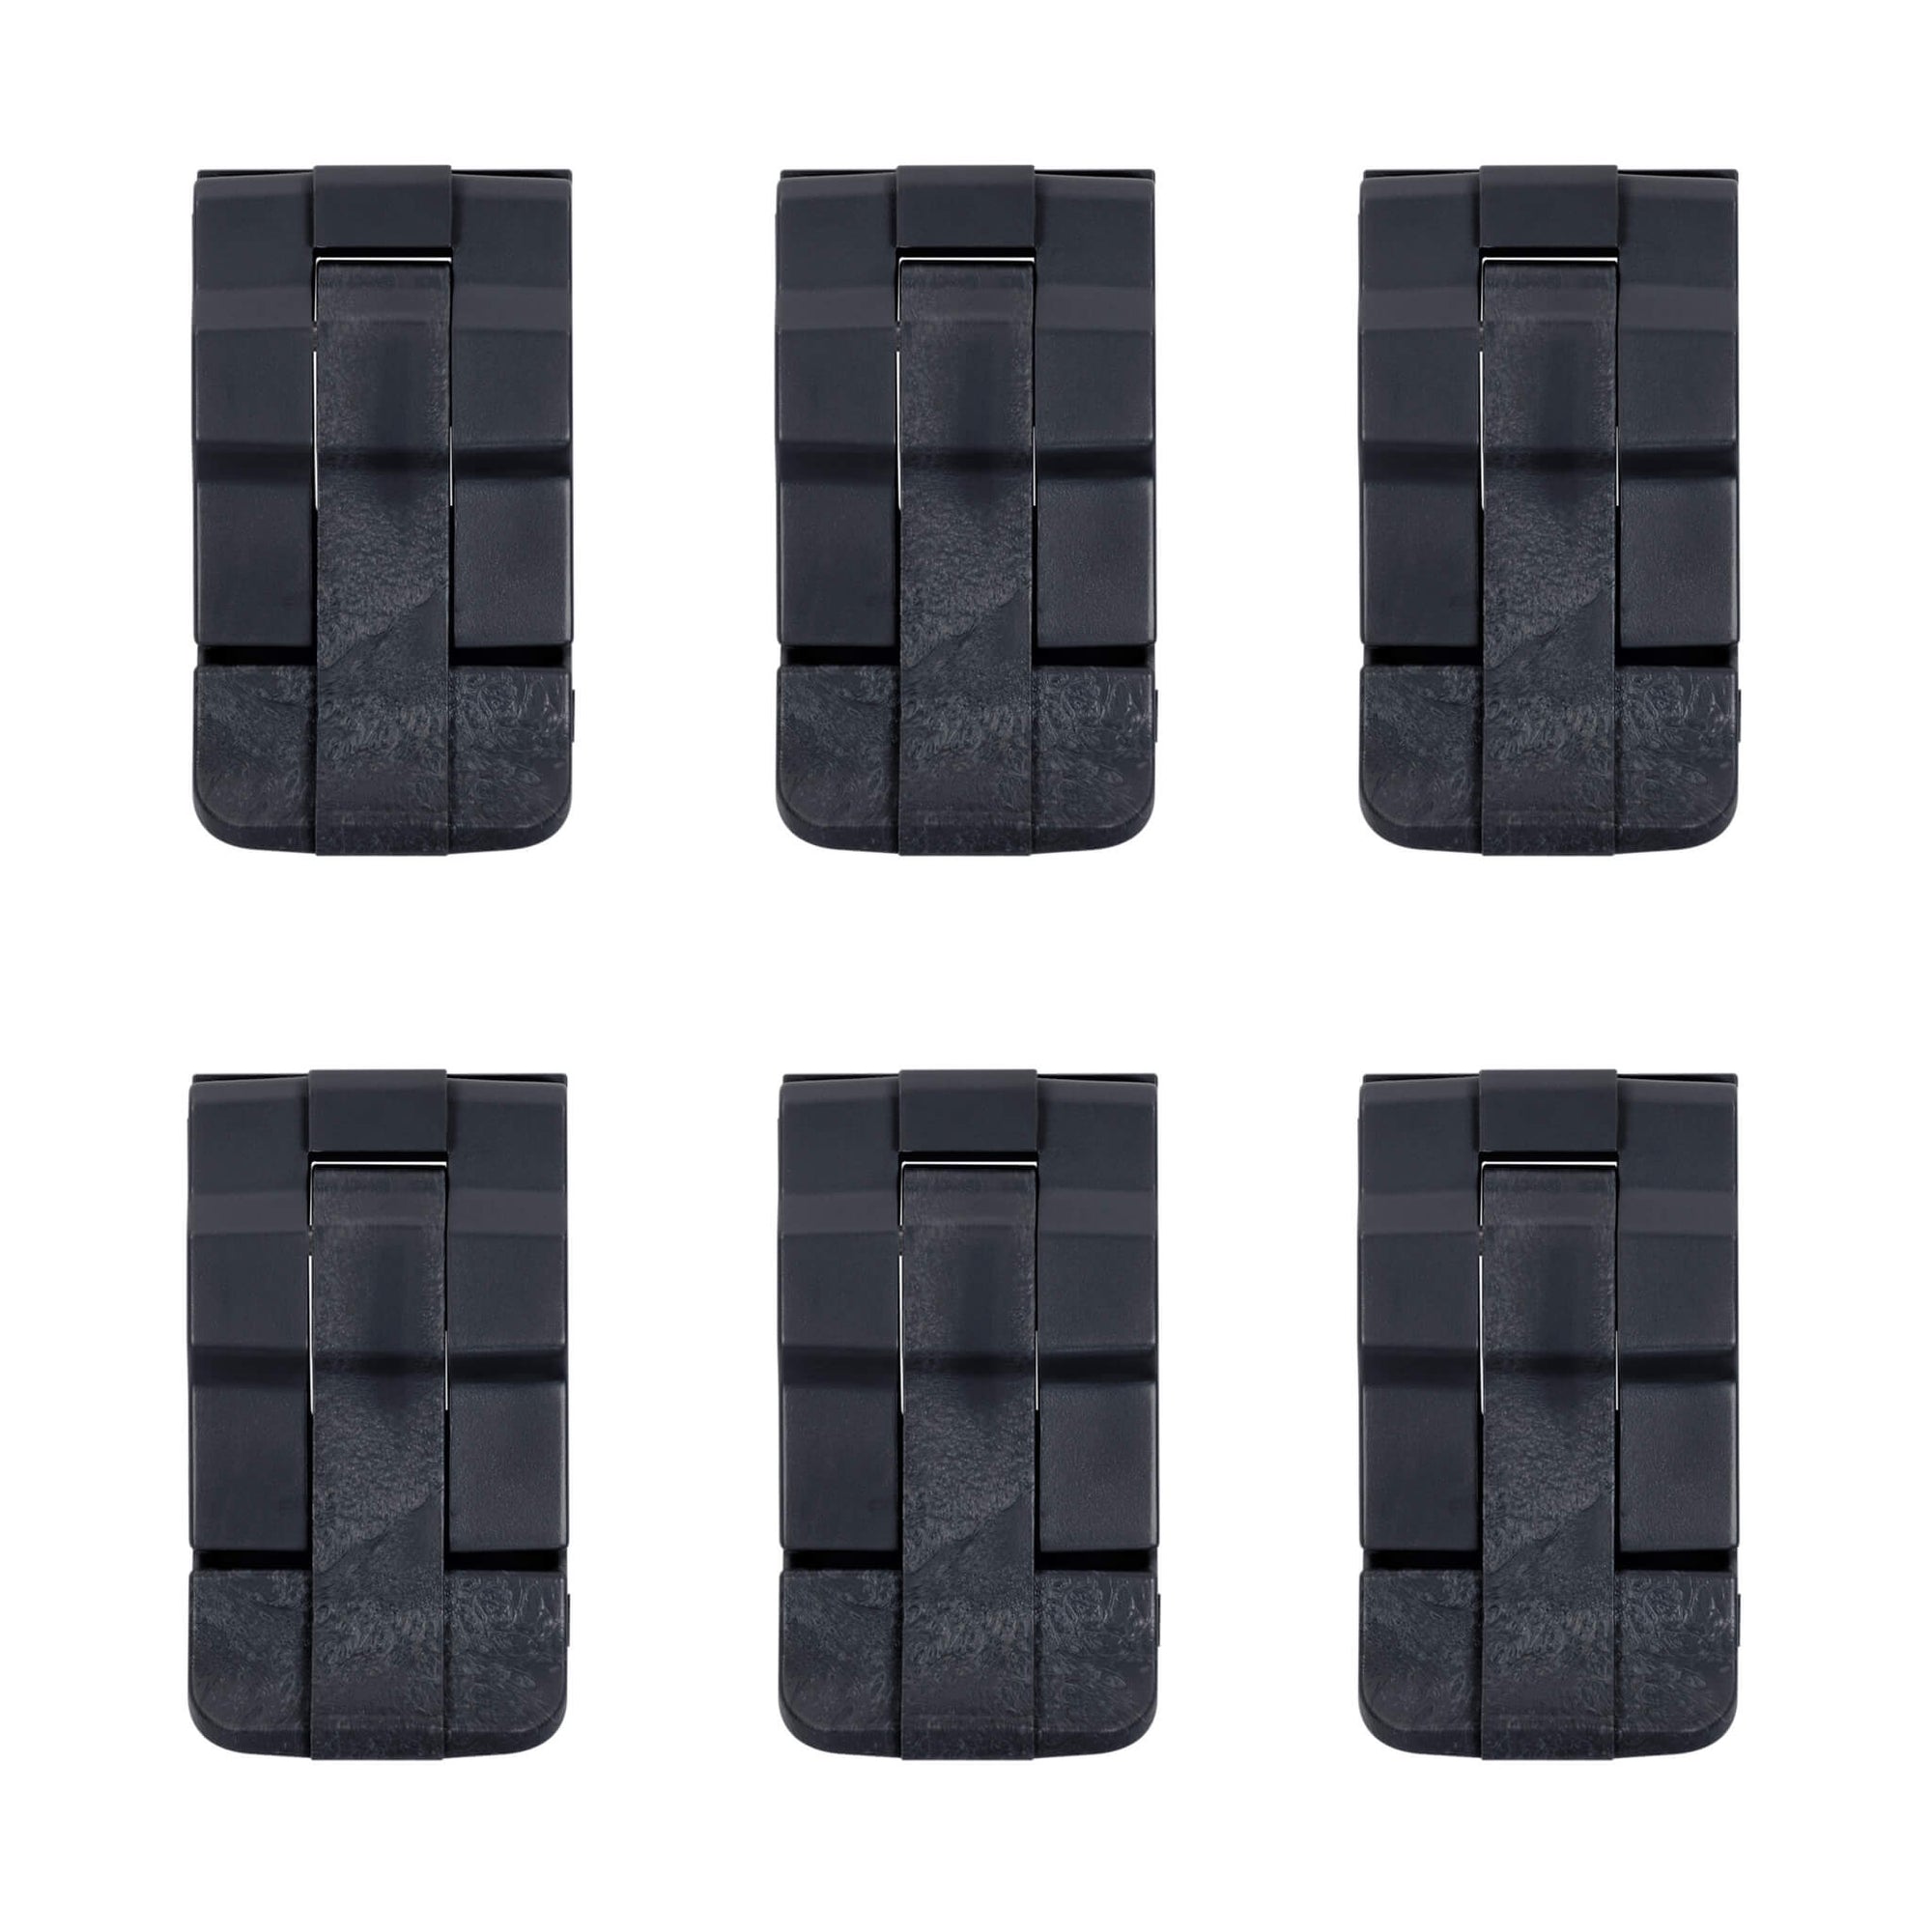 Pelican 0340 Replacement Latches, Black (Set of 6) ColorCase 